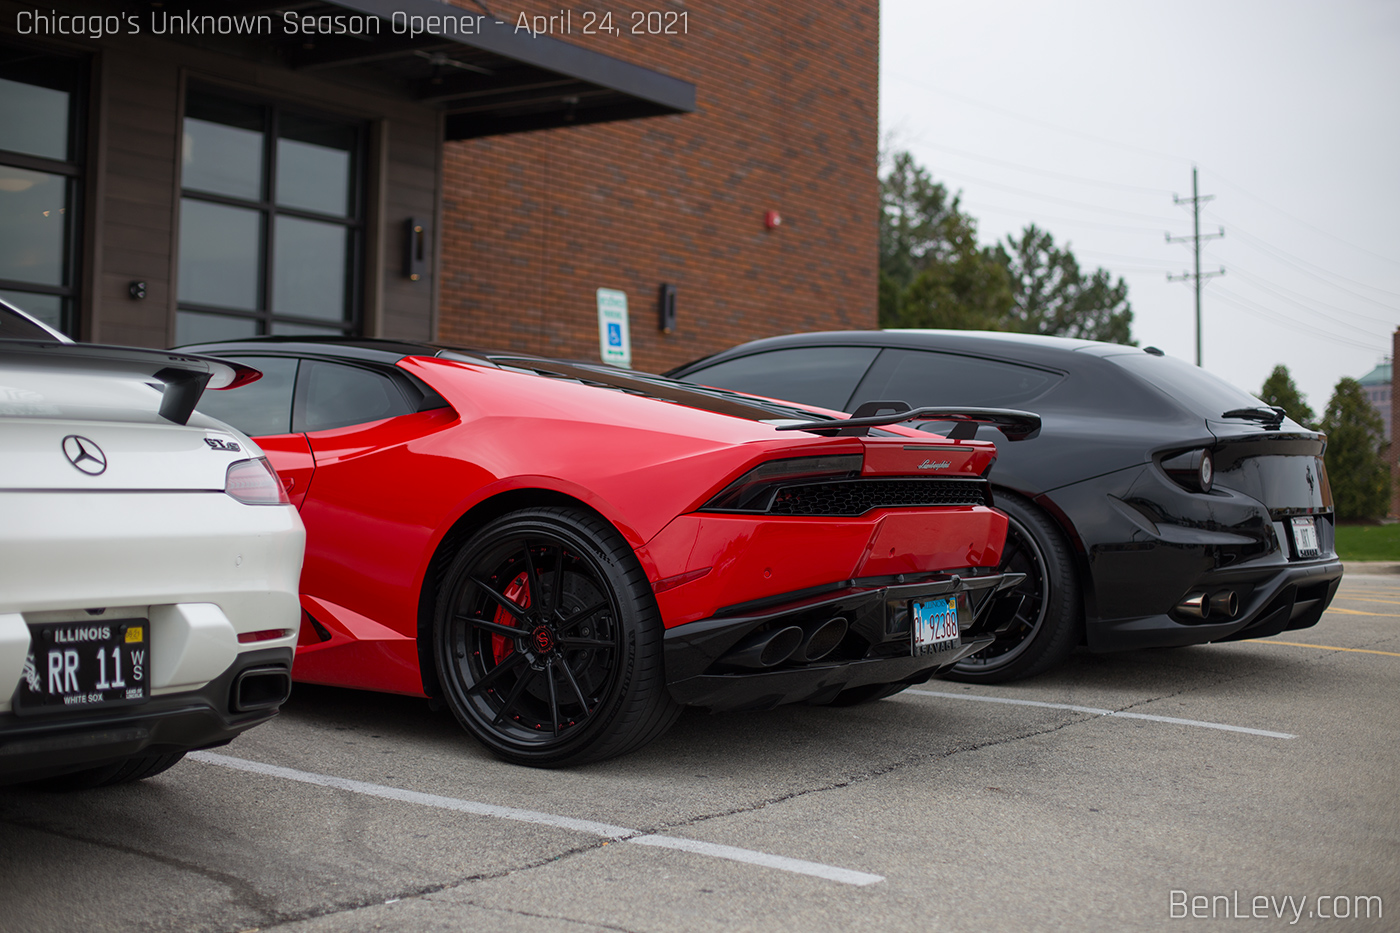 Supercars Parked at a Starbucks